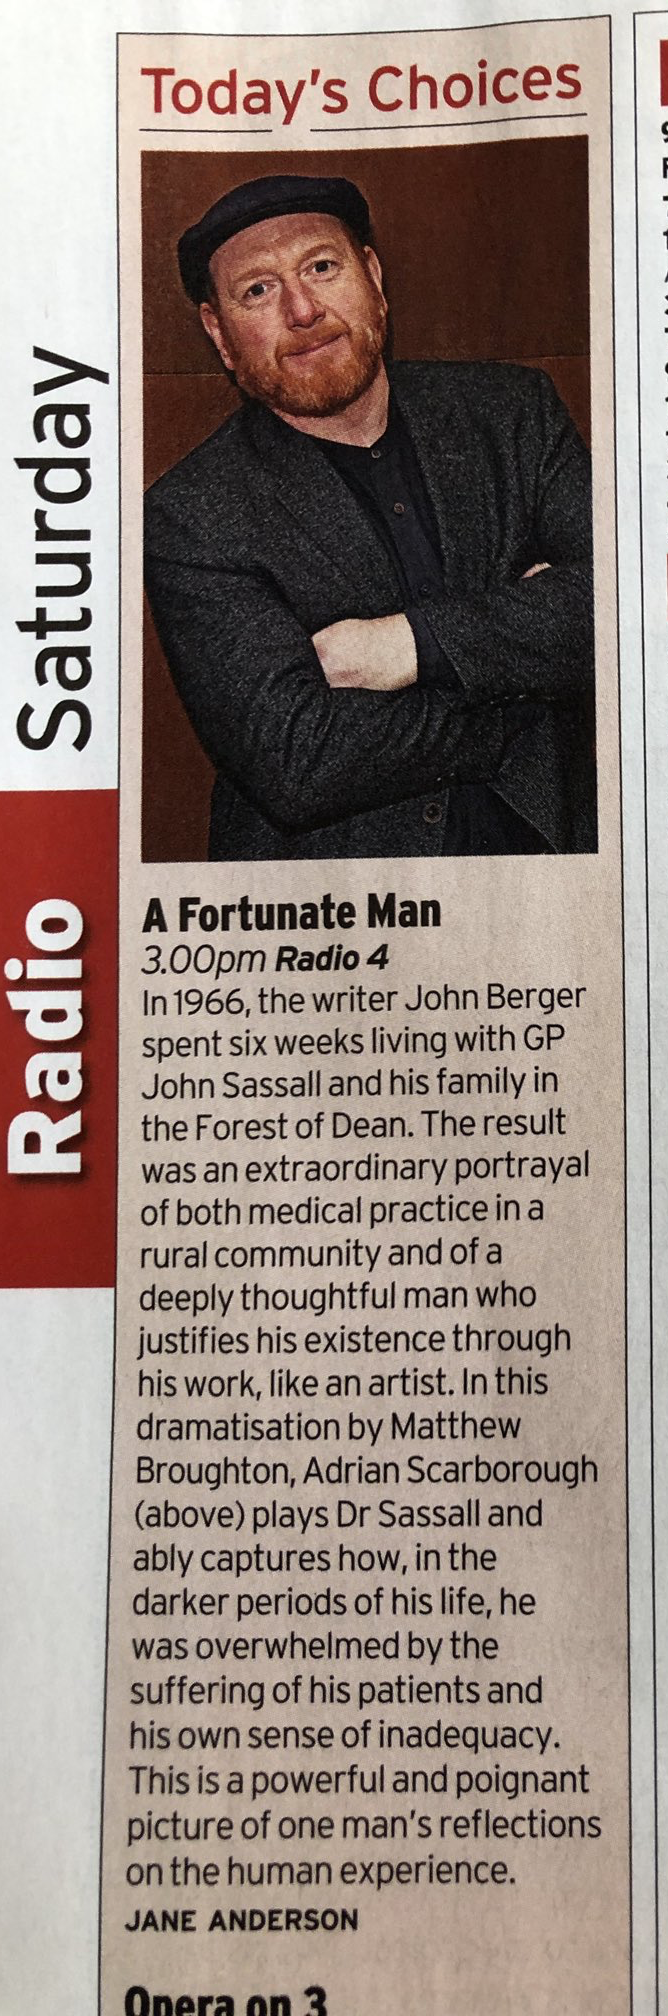 radio times review